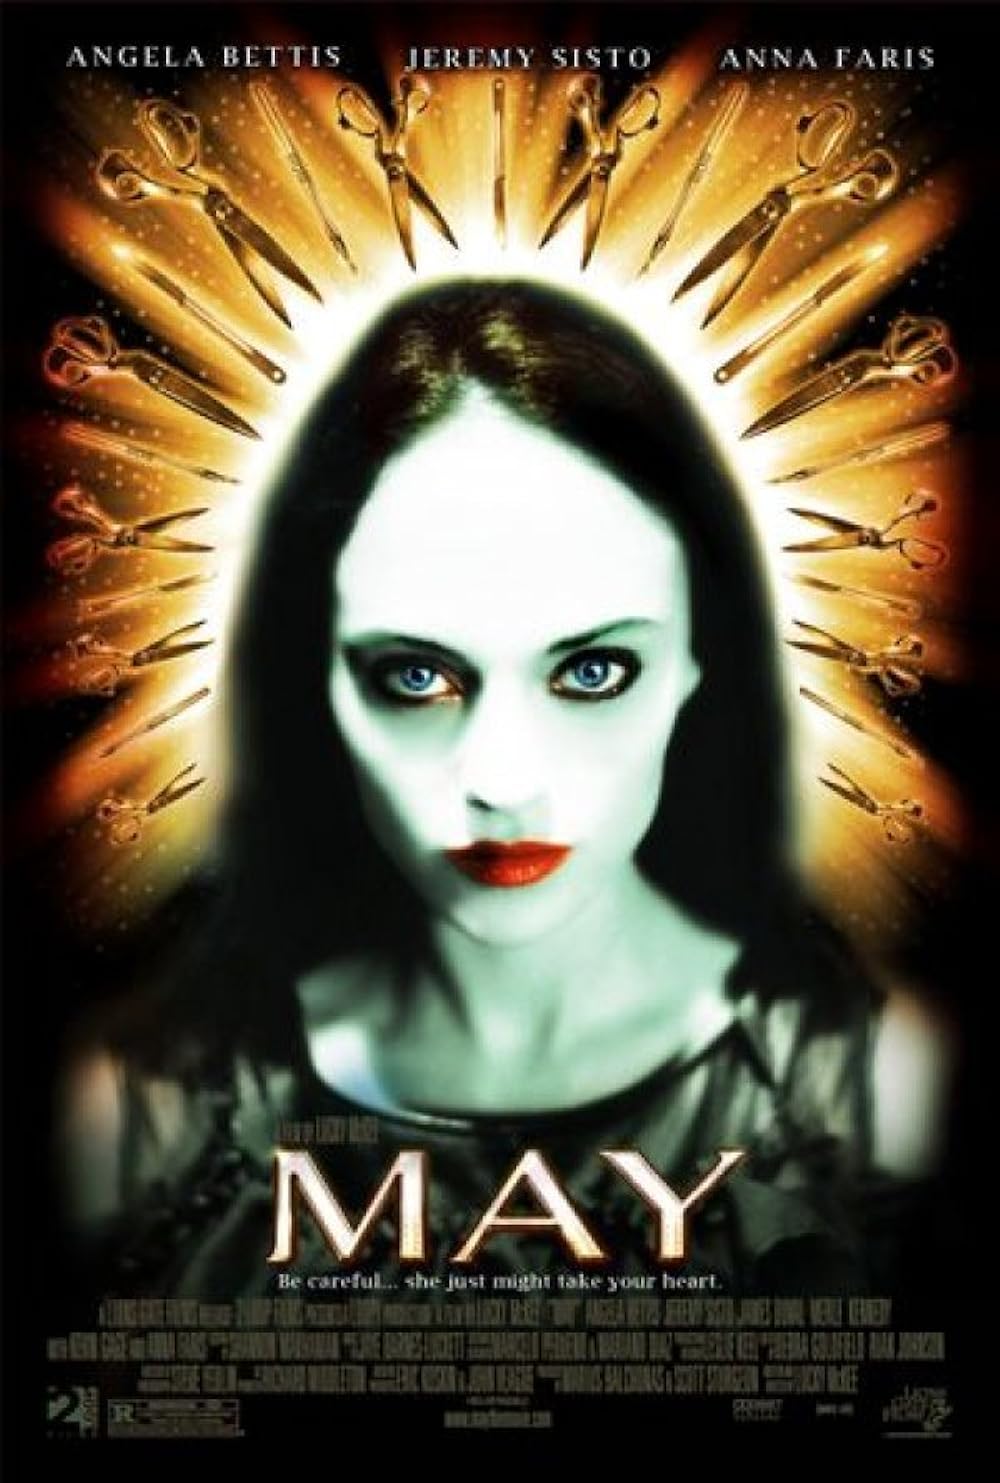 May (2001) - a perfect mix of comedy and discomfort